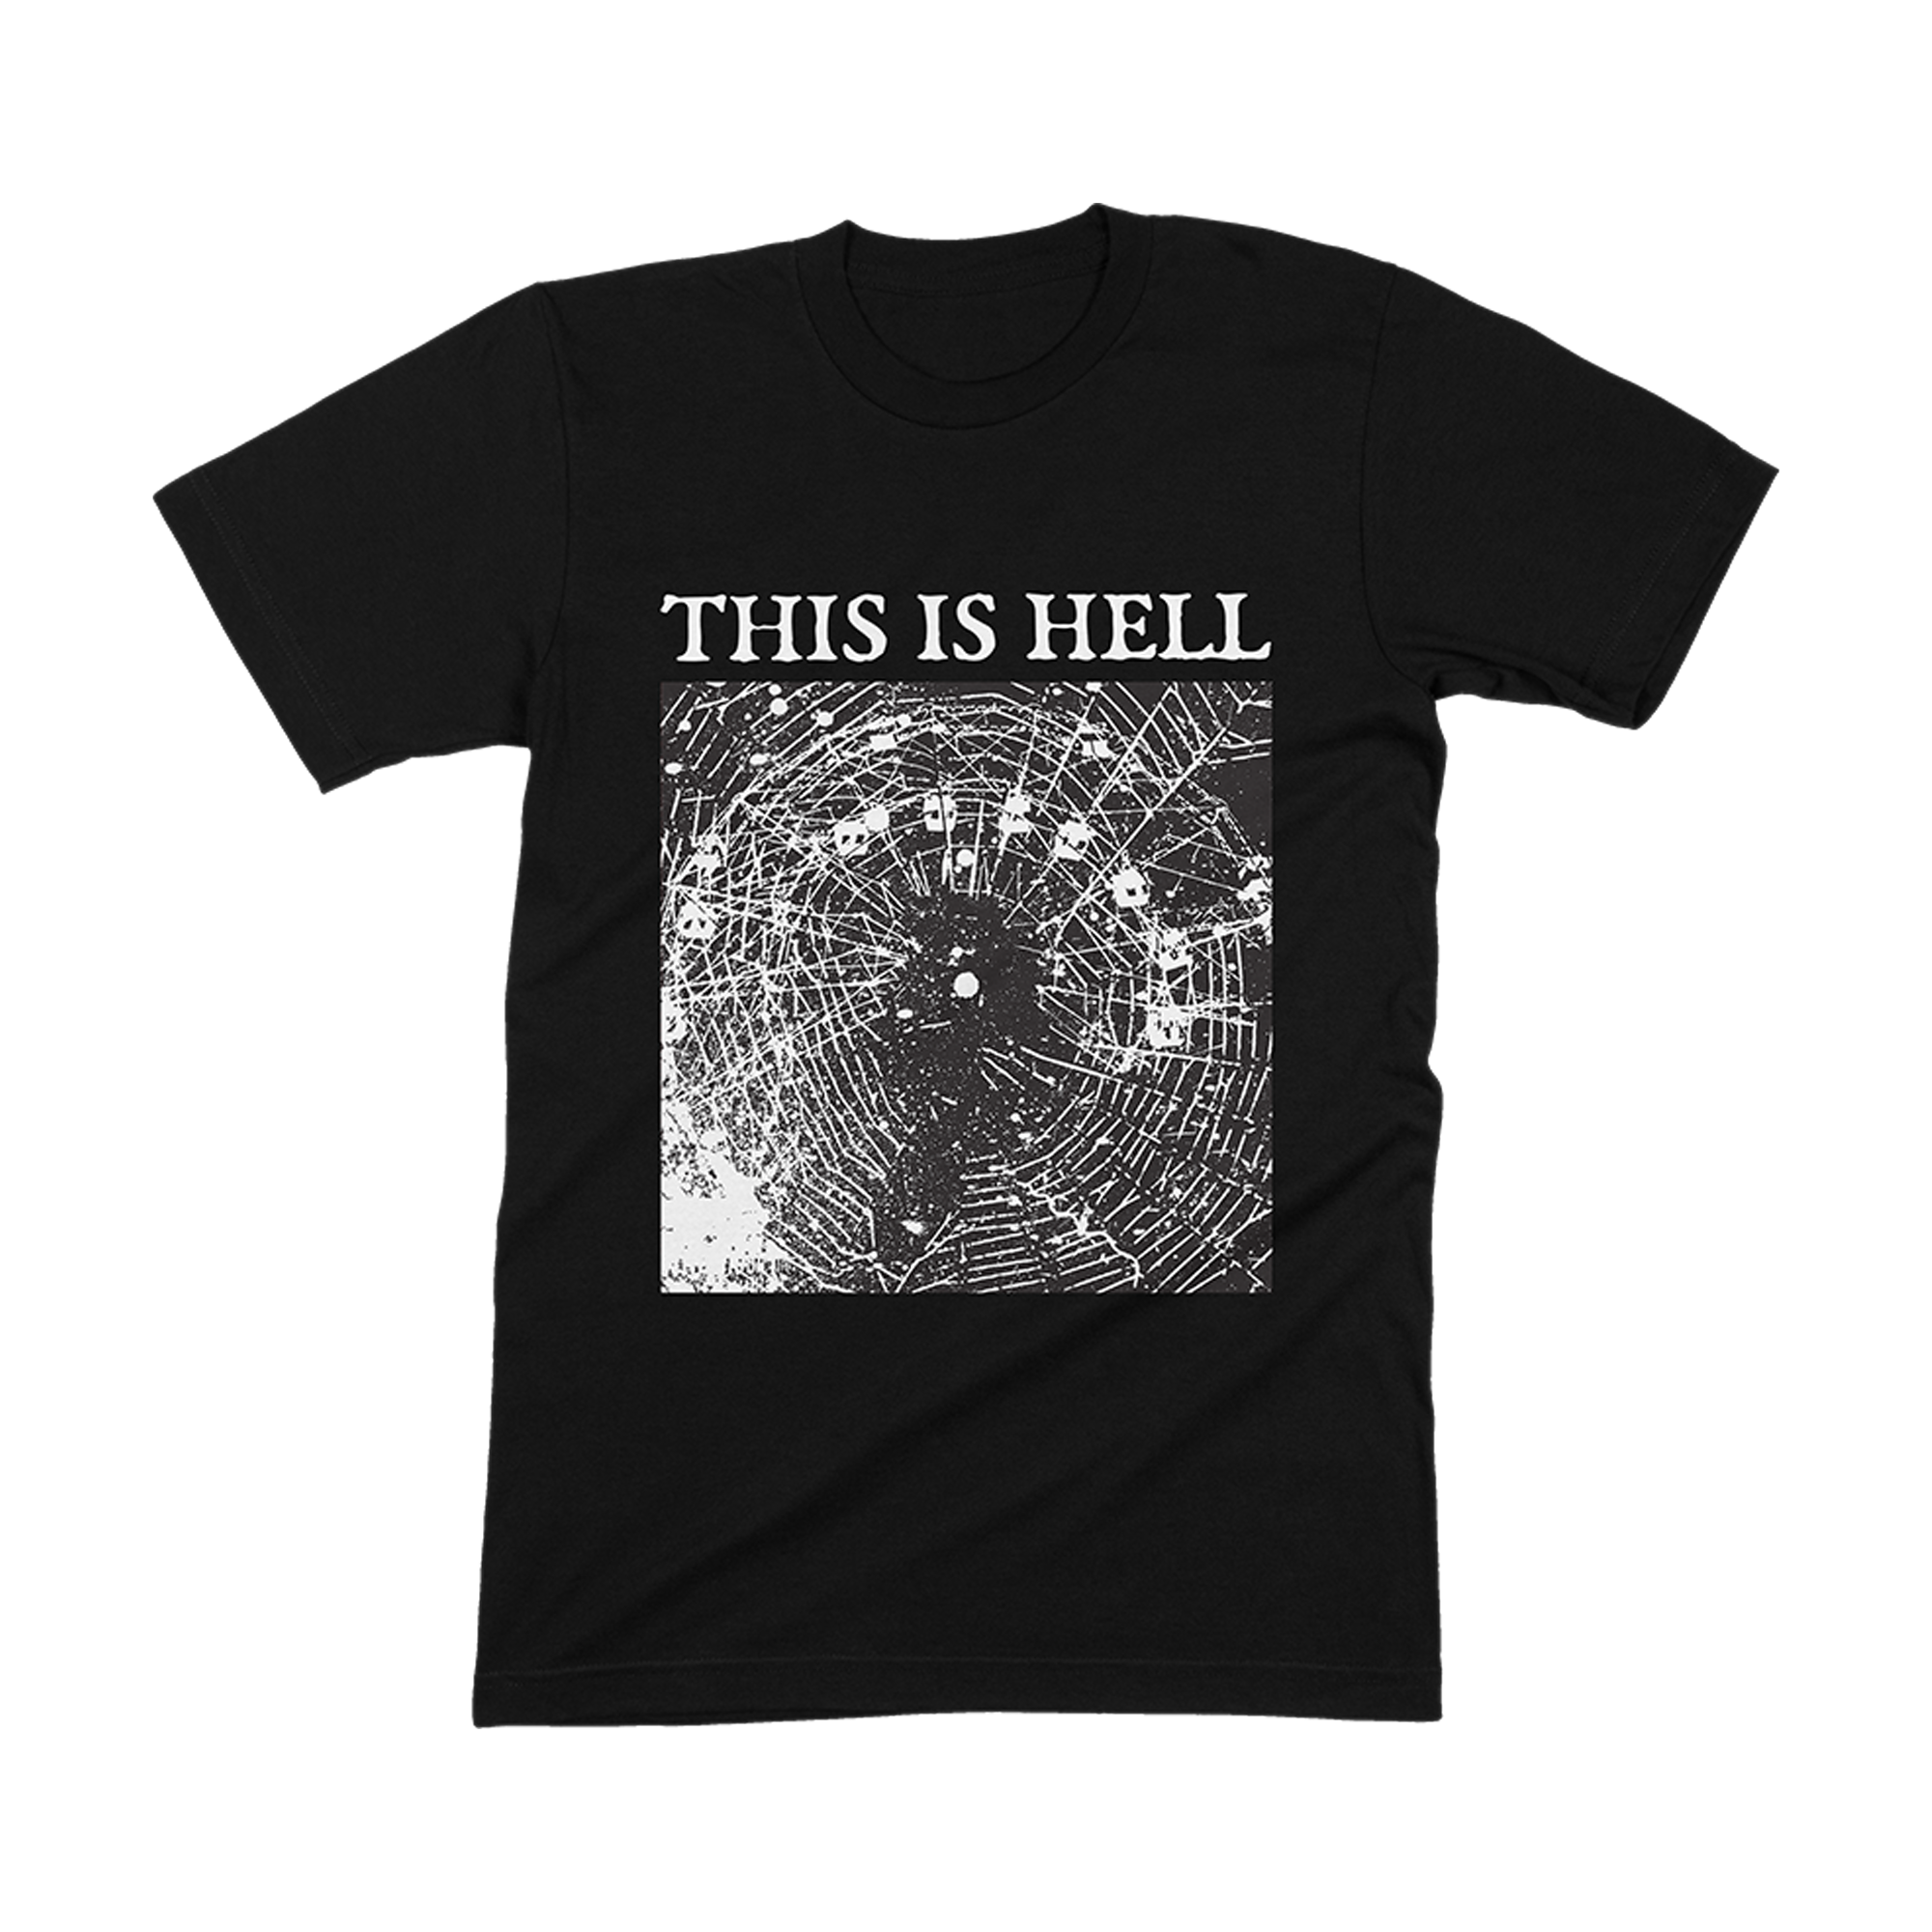 This Is Hell - Retrospect Shirt